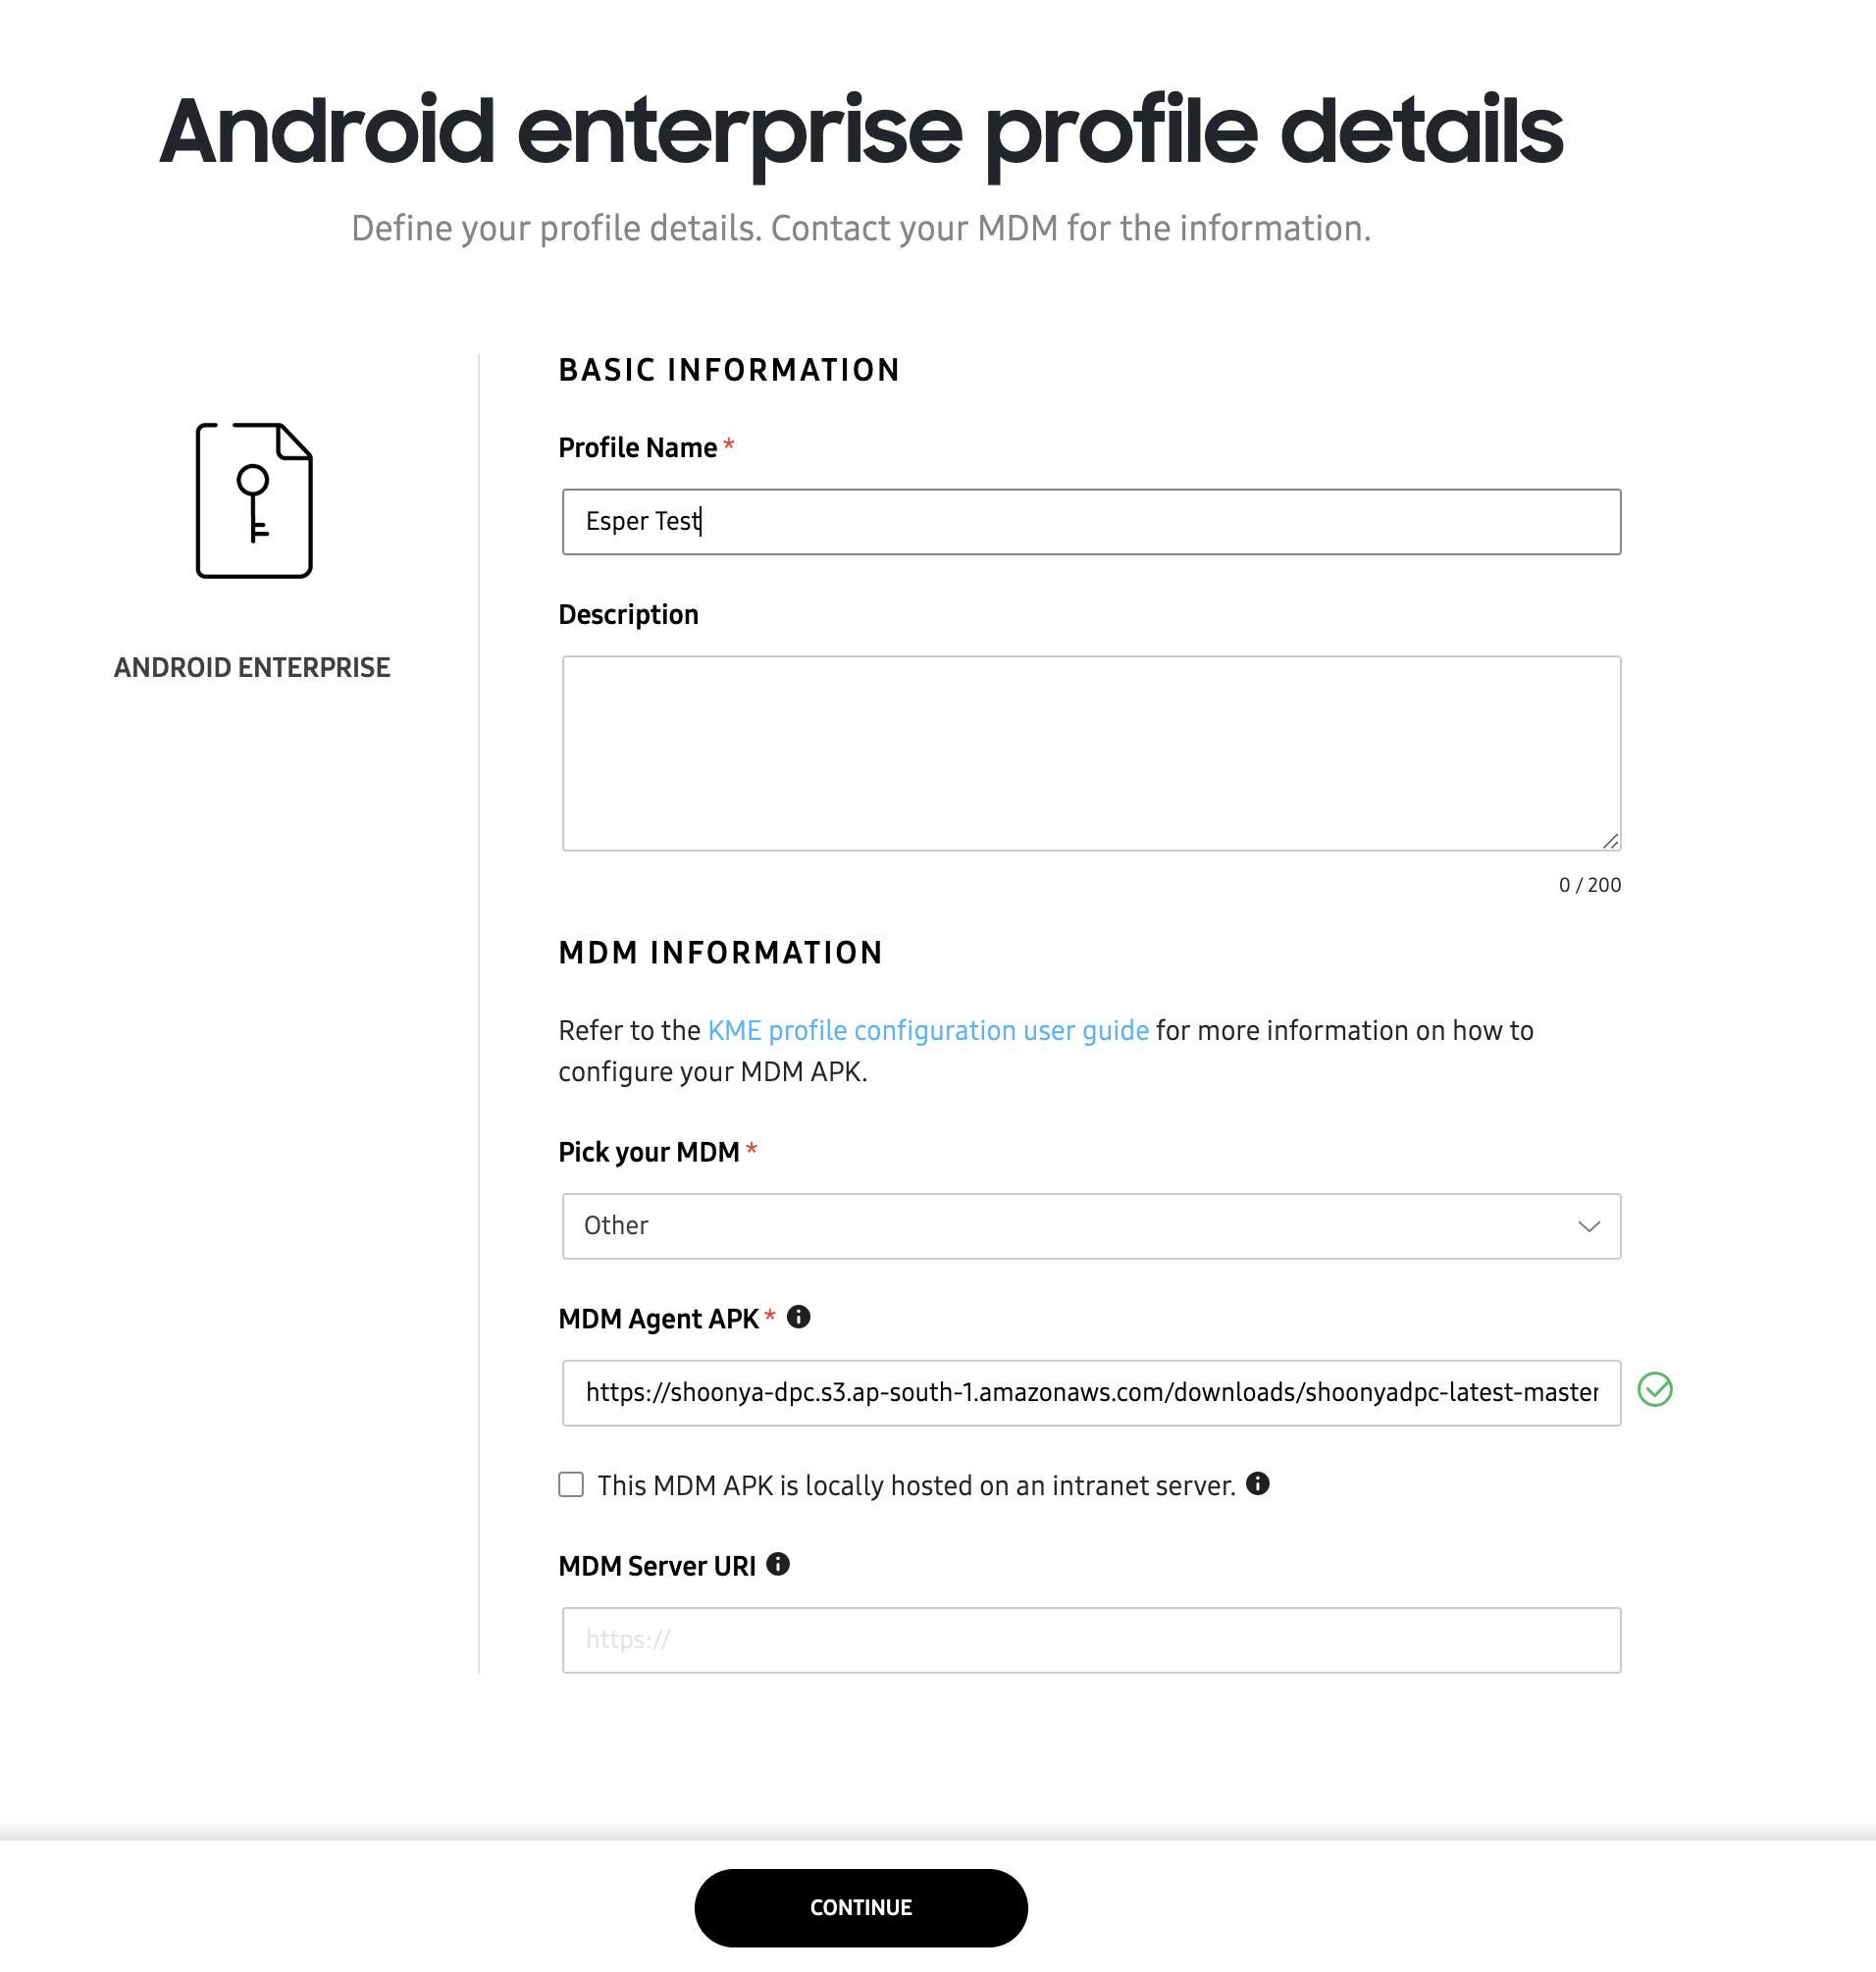 android_enterprise_profile_details_filled_out_with_Other_selected_and_the_aws_link_in_mdm_agent_apk.png